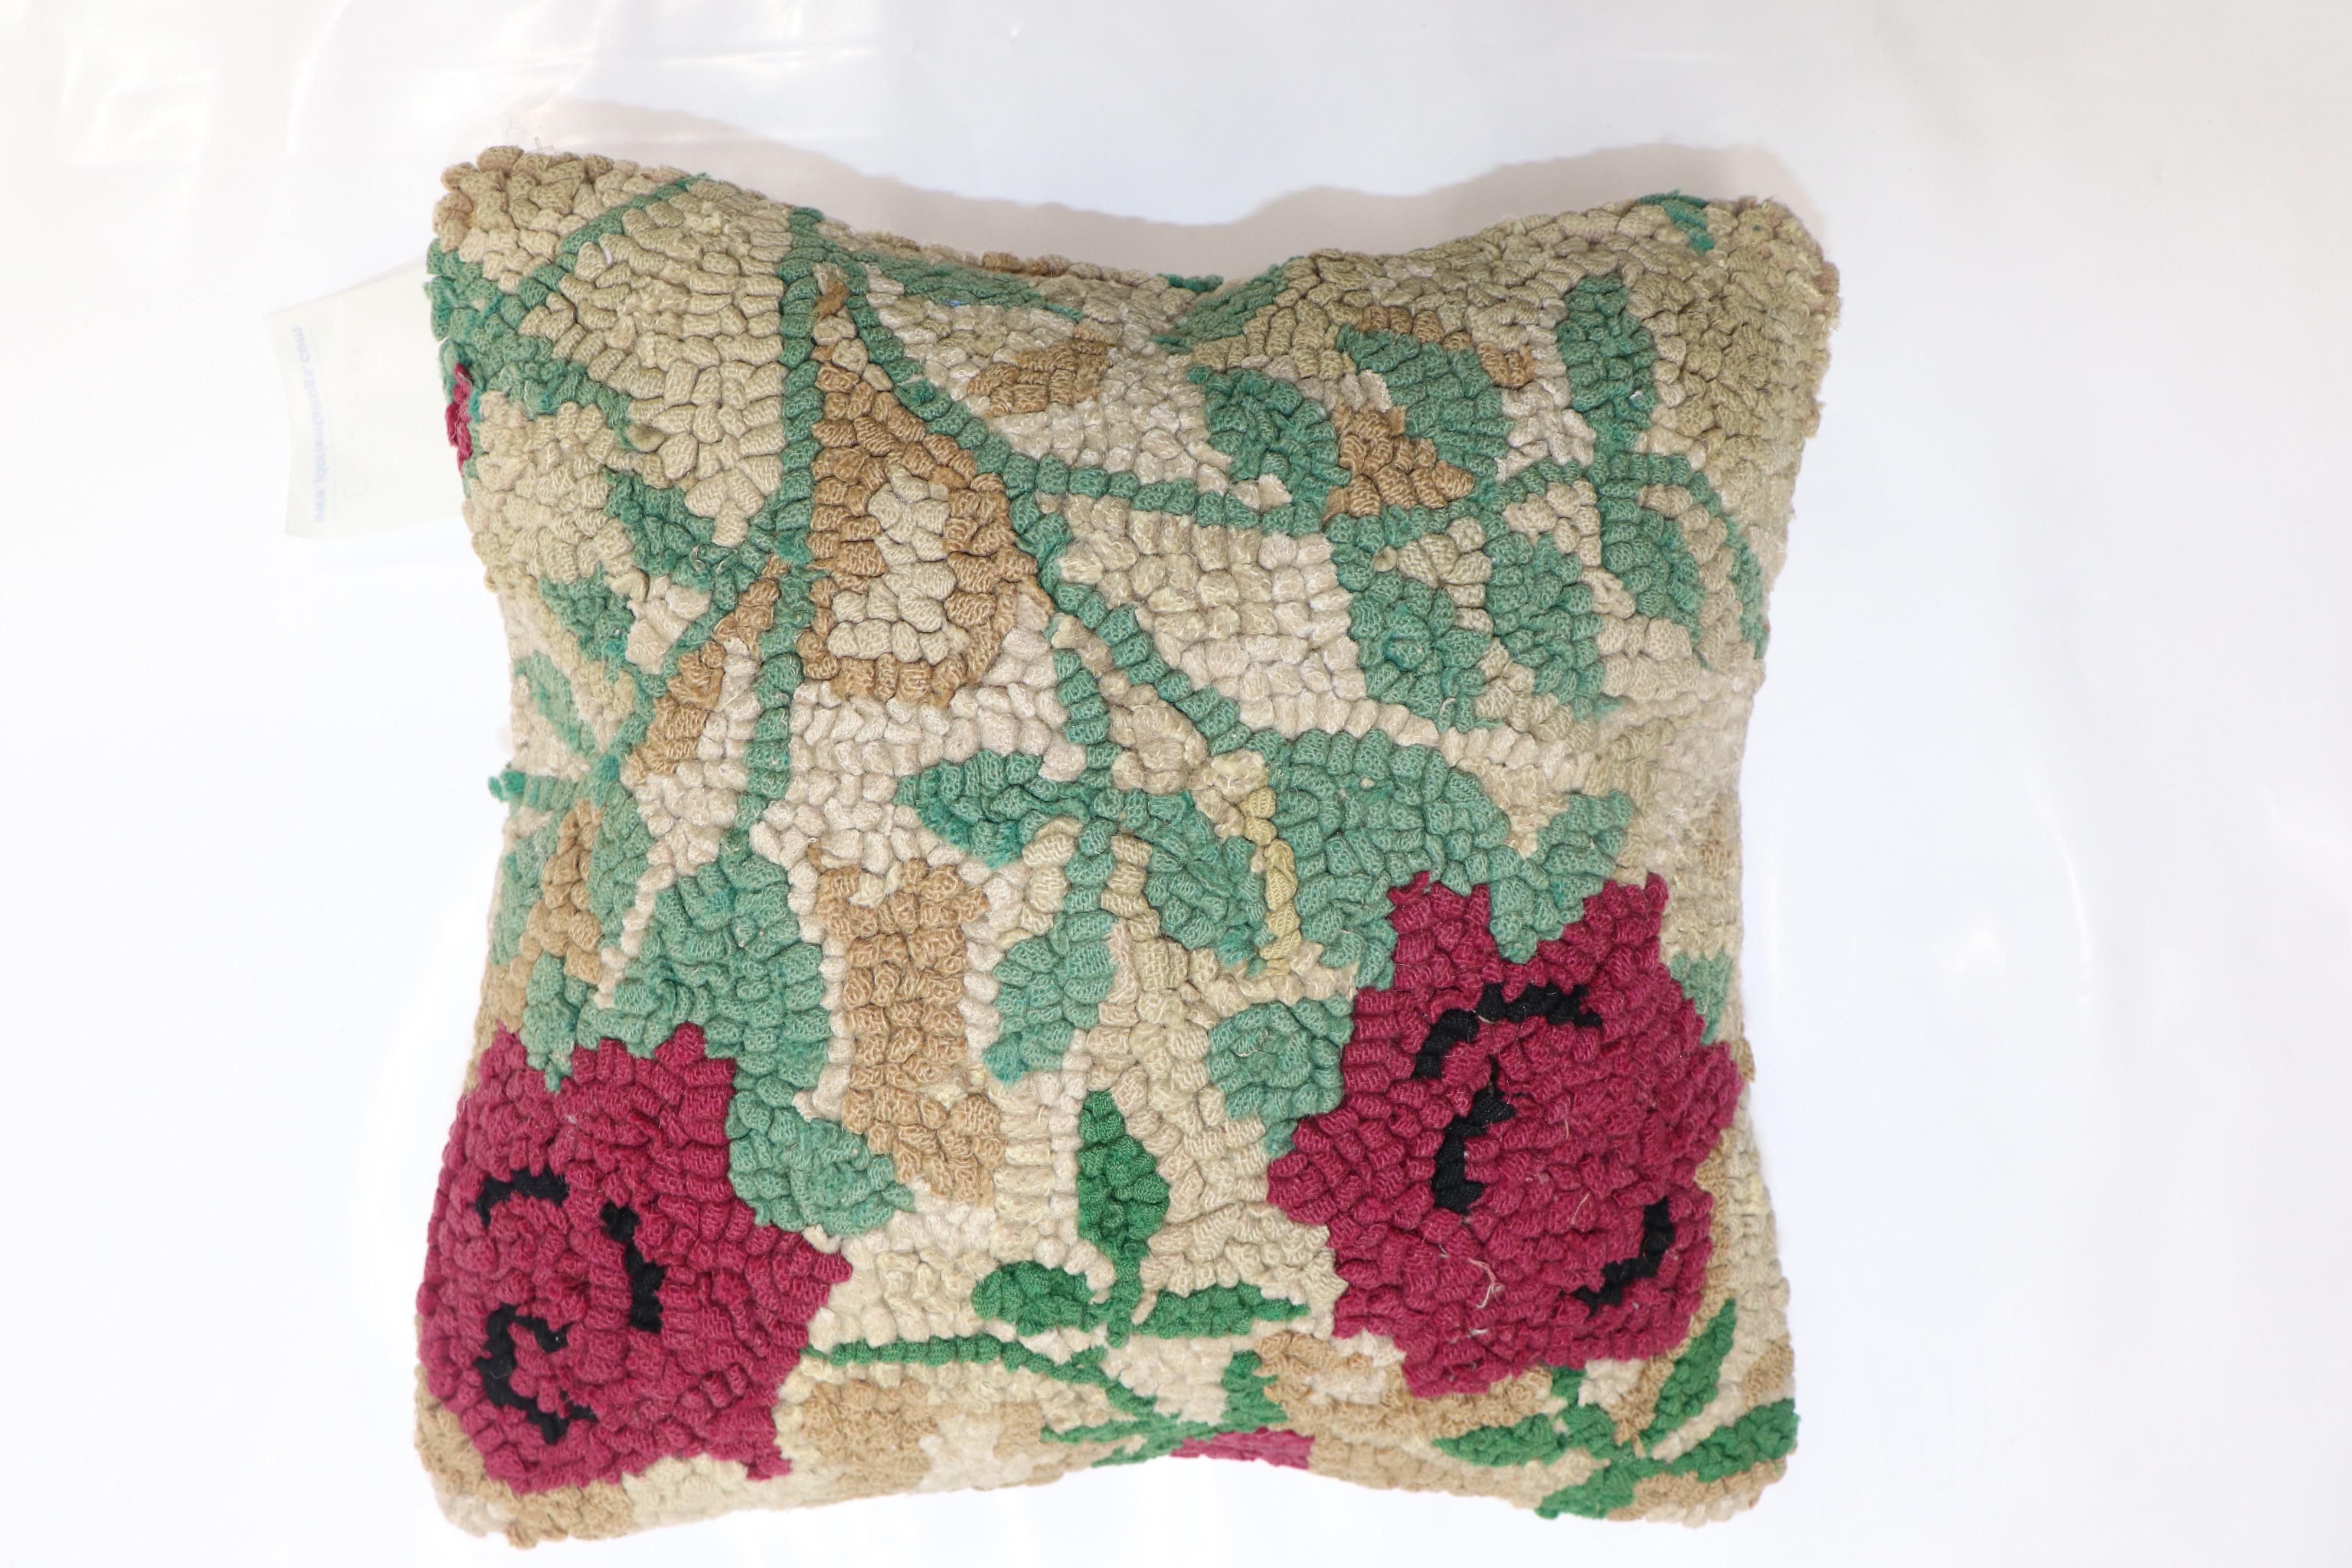 Pillow made from a colorful 20th-century floral American hooked rug

Measures: 11